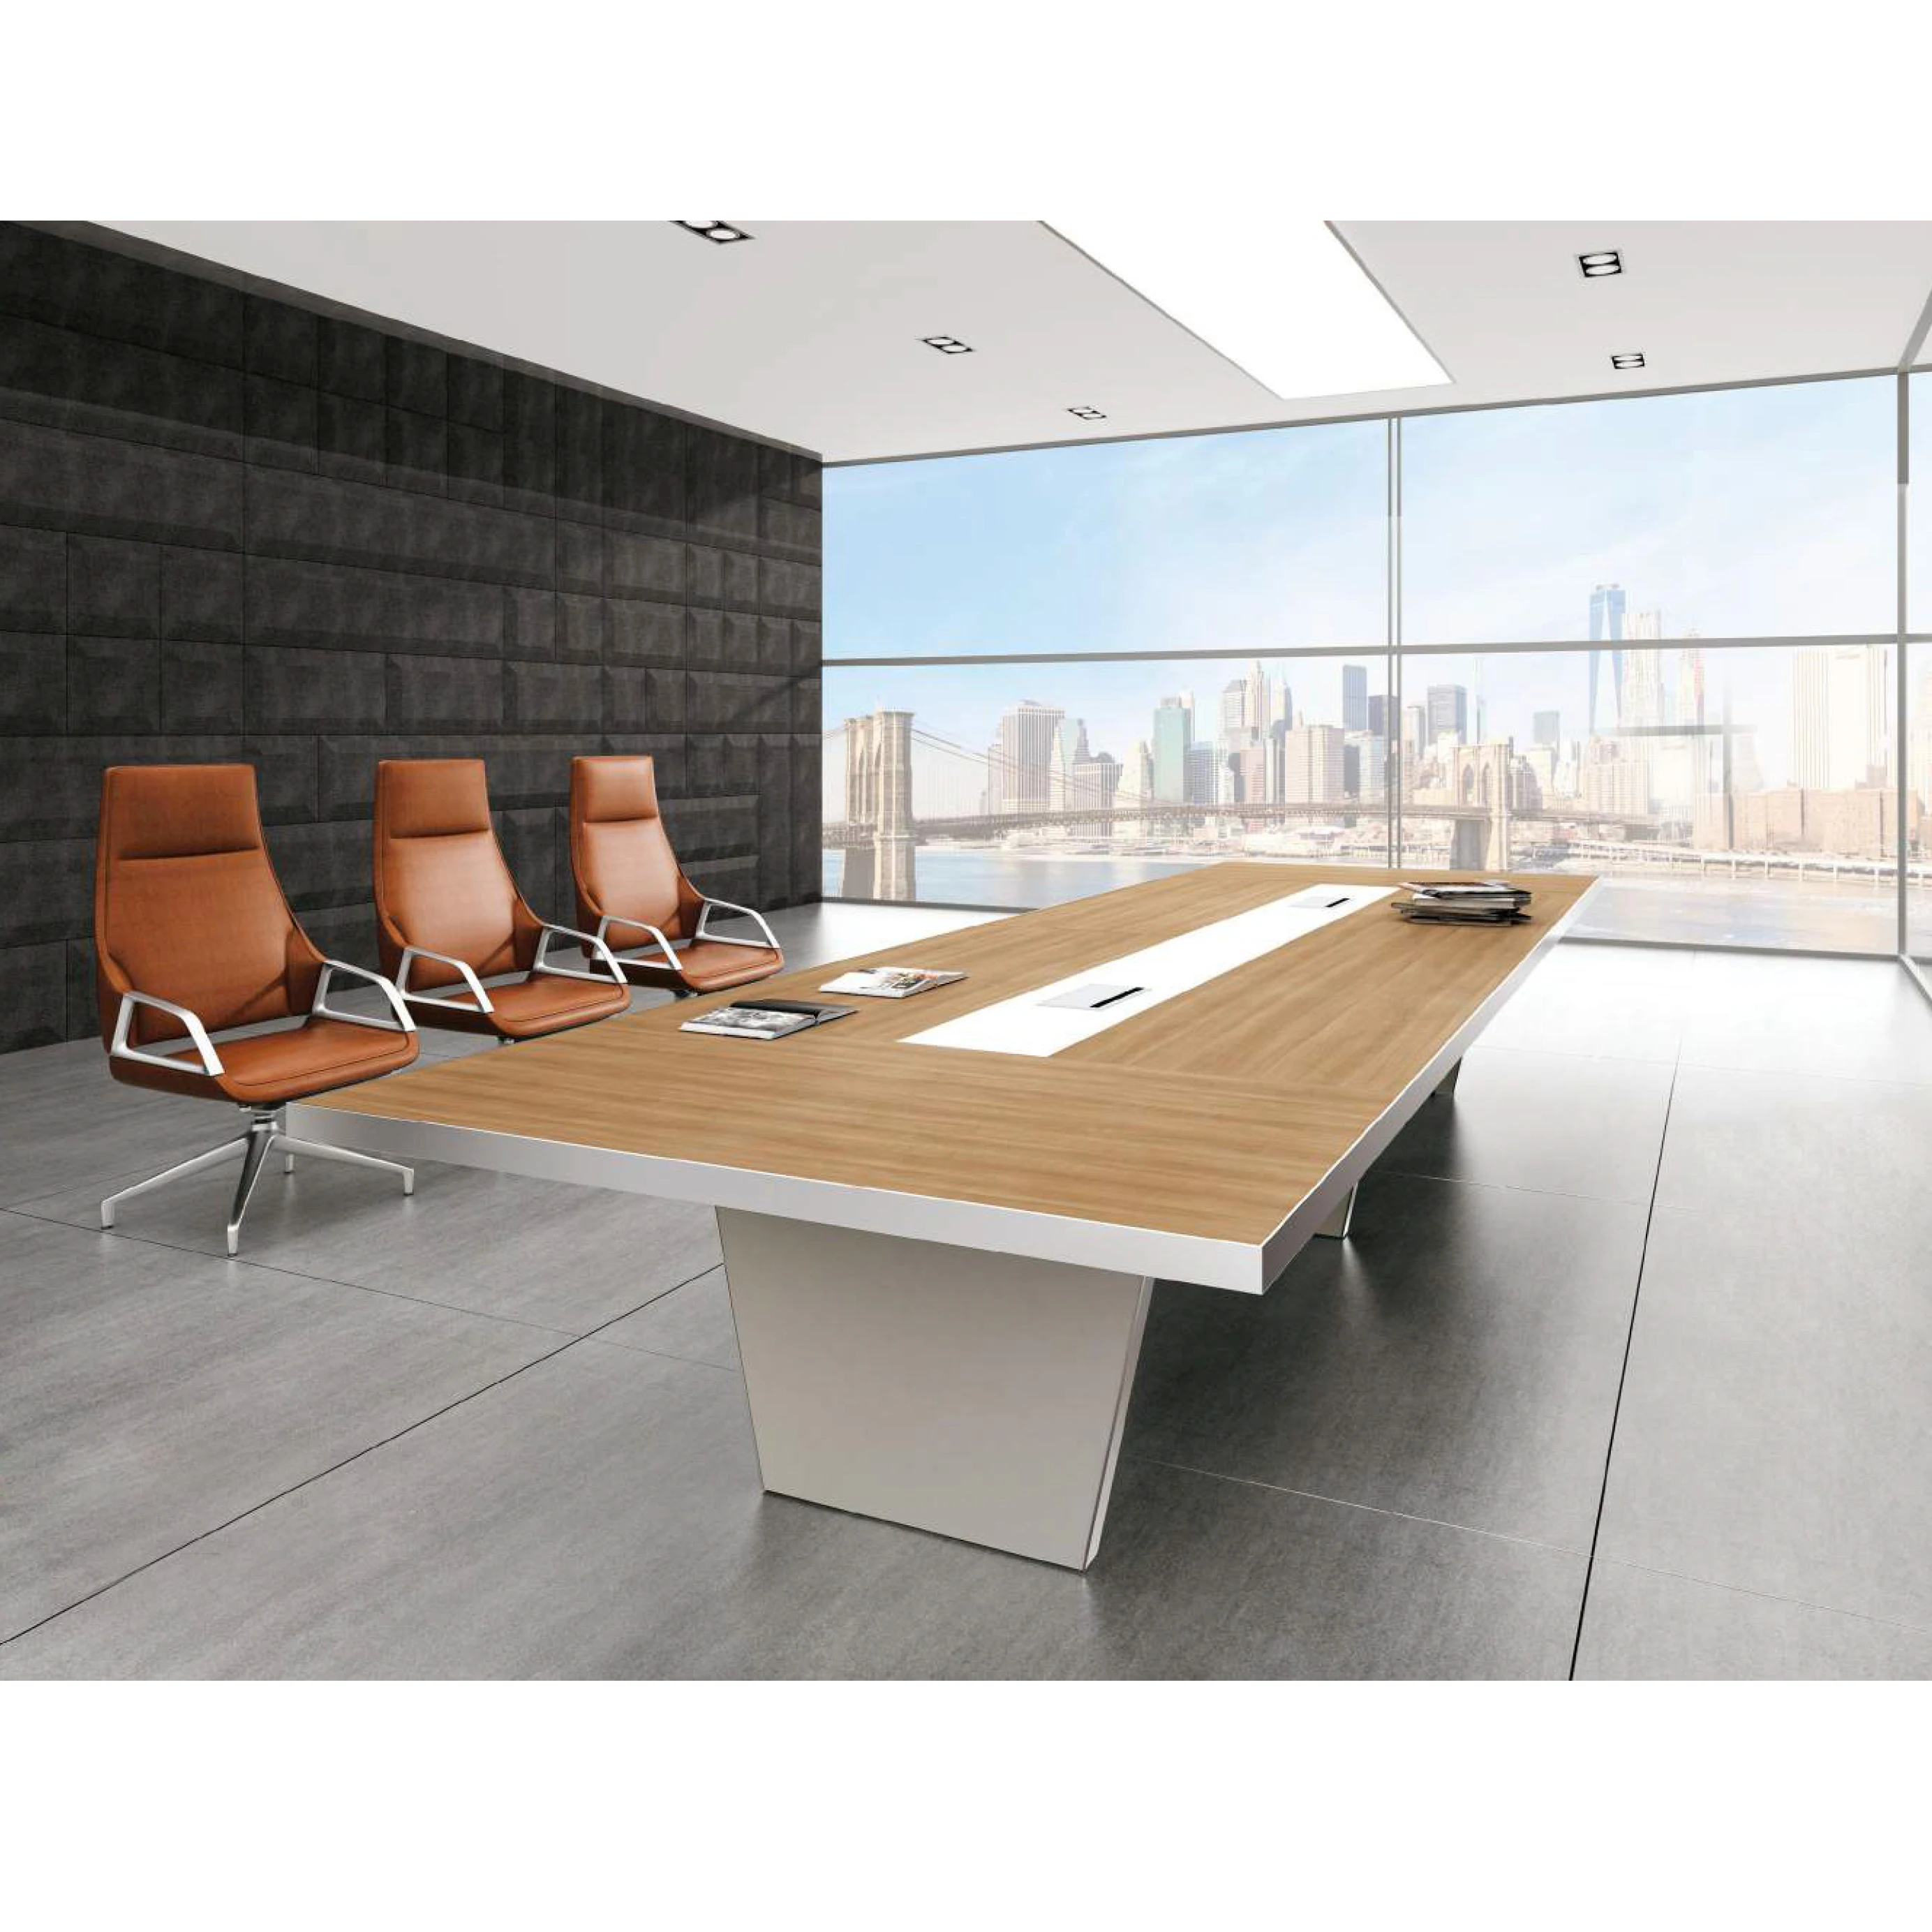 China Factory 10 Person Seater Modern Office Conference Table Meeting Conference Room Table Furnitur